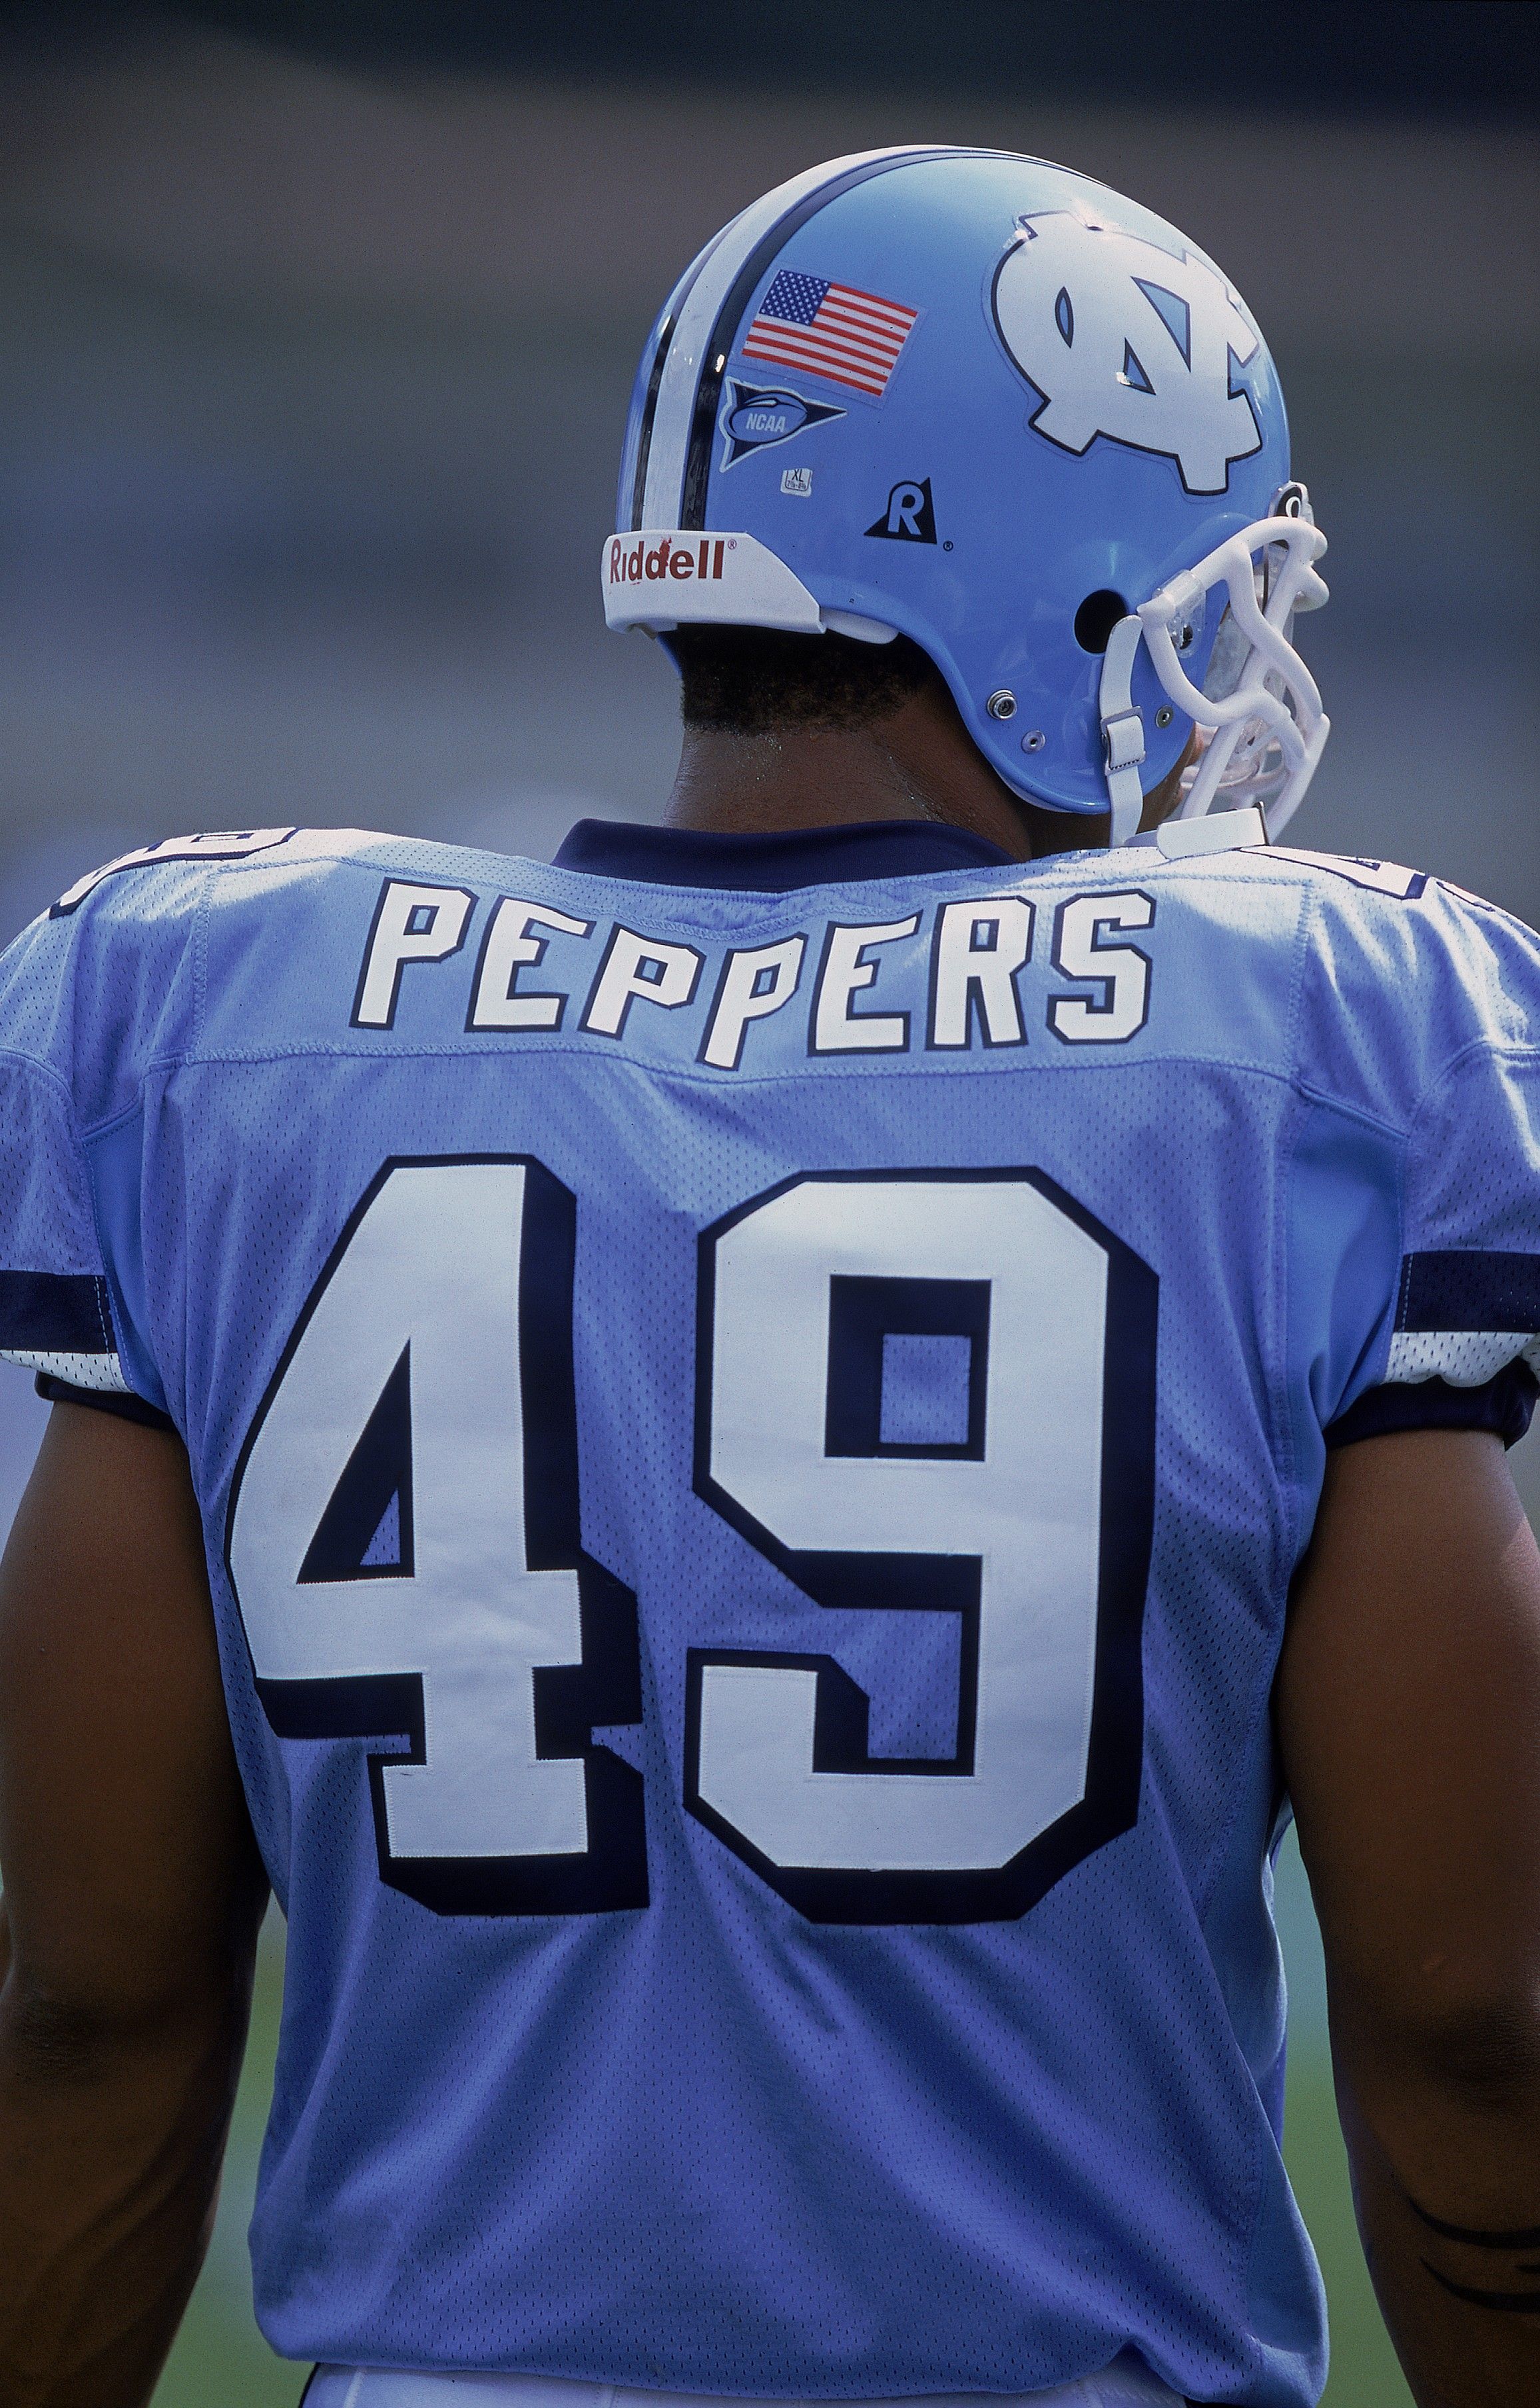 Julius Peppers playing for North Carolina. 